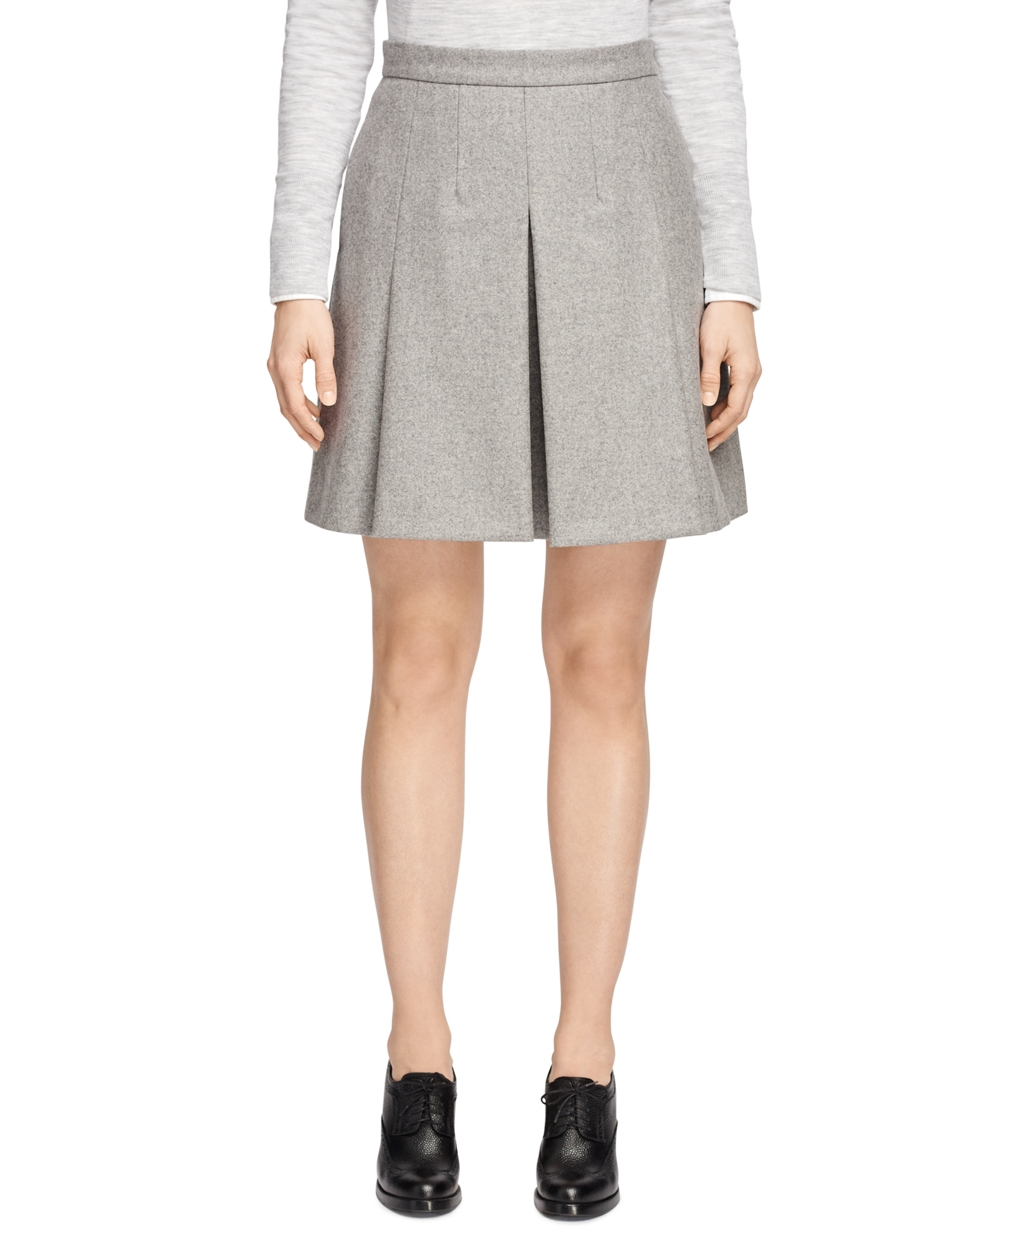 Lyst - Brooks Brothers Wool Blend Pleated Skirt in Gray